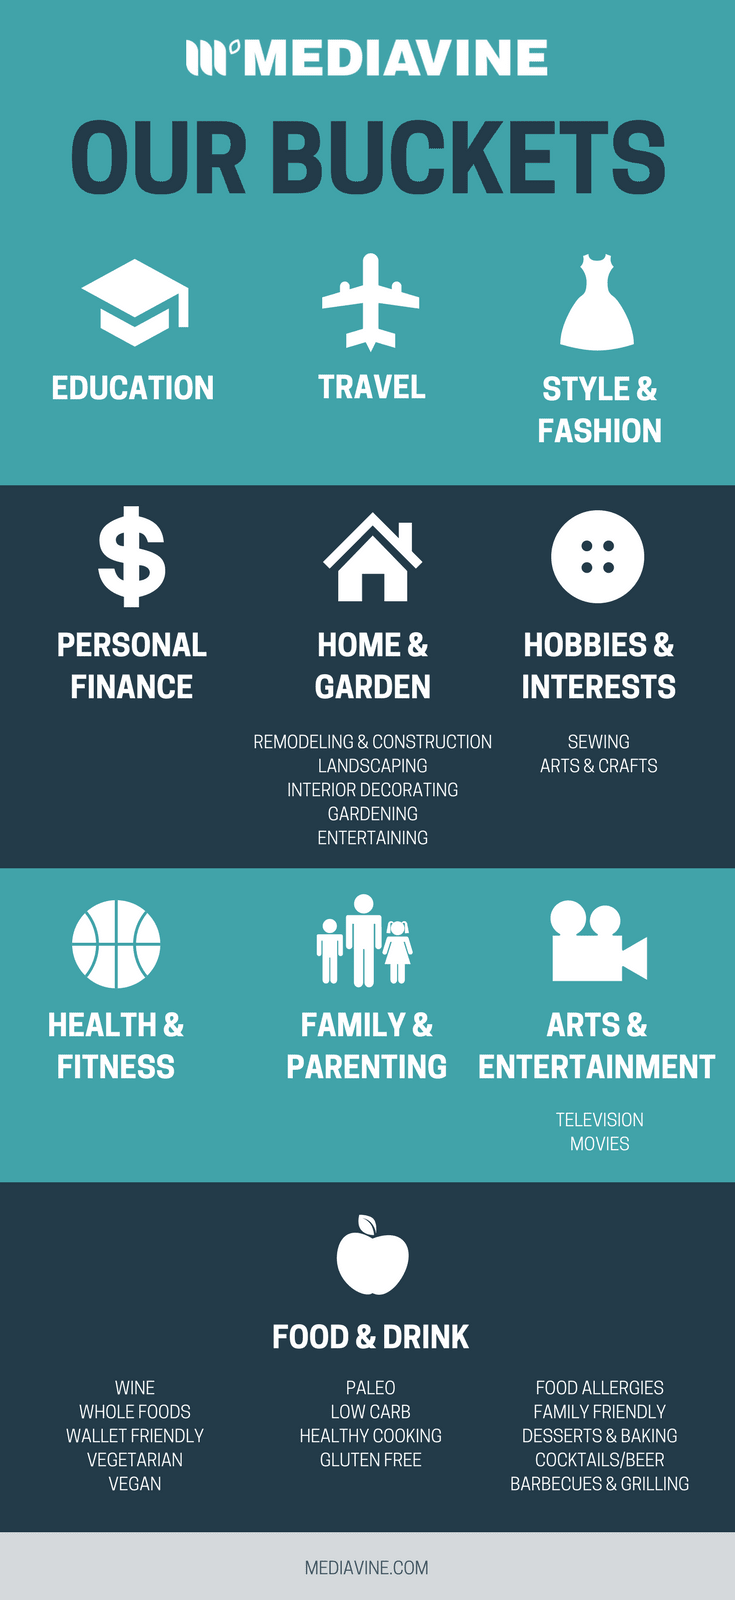 Mediavine's buckets include education, travel, style & fashion, personal finance, home & garden, hobbies and interests, health & fitness, family & parenting, food & drink, and arts & entertainment.